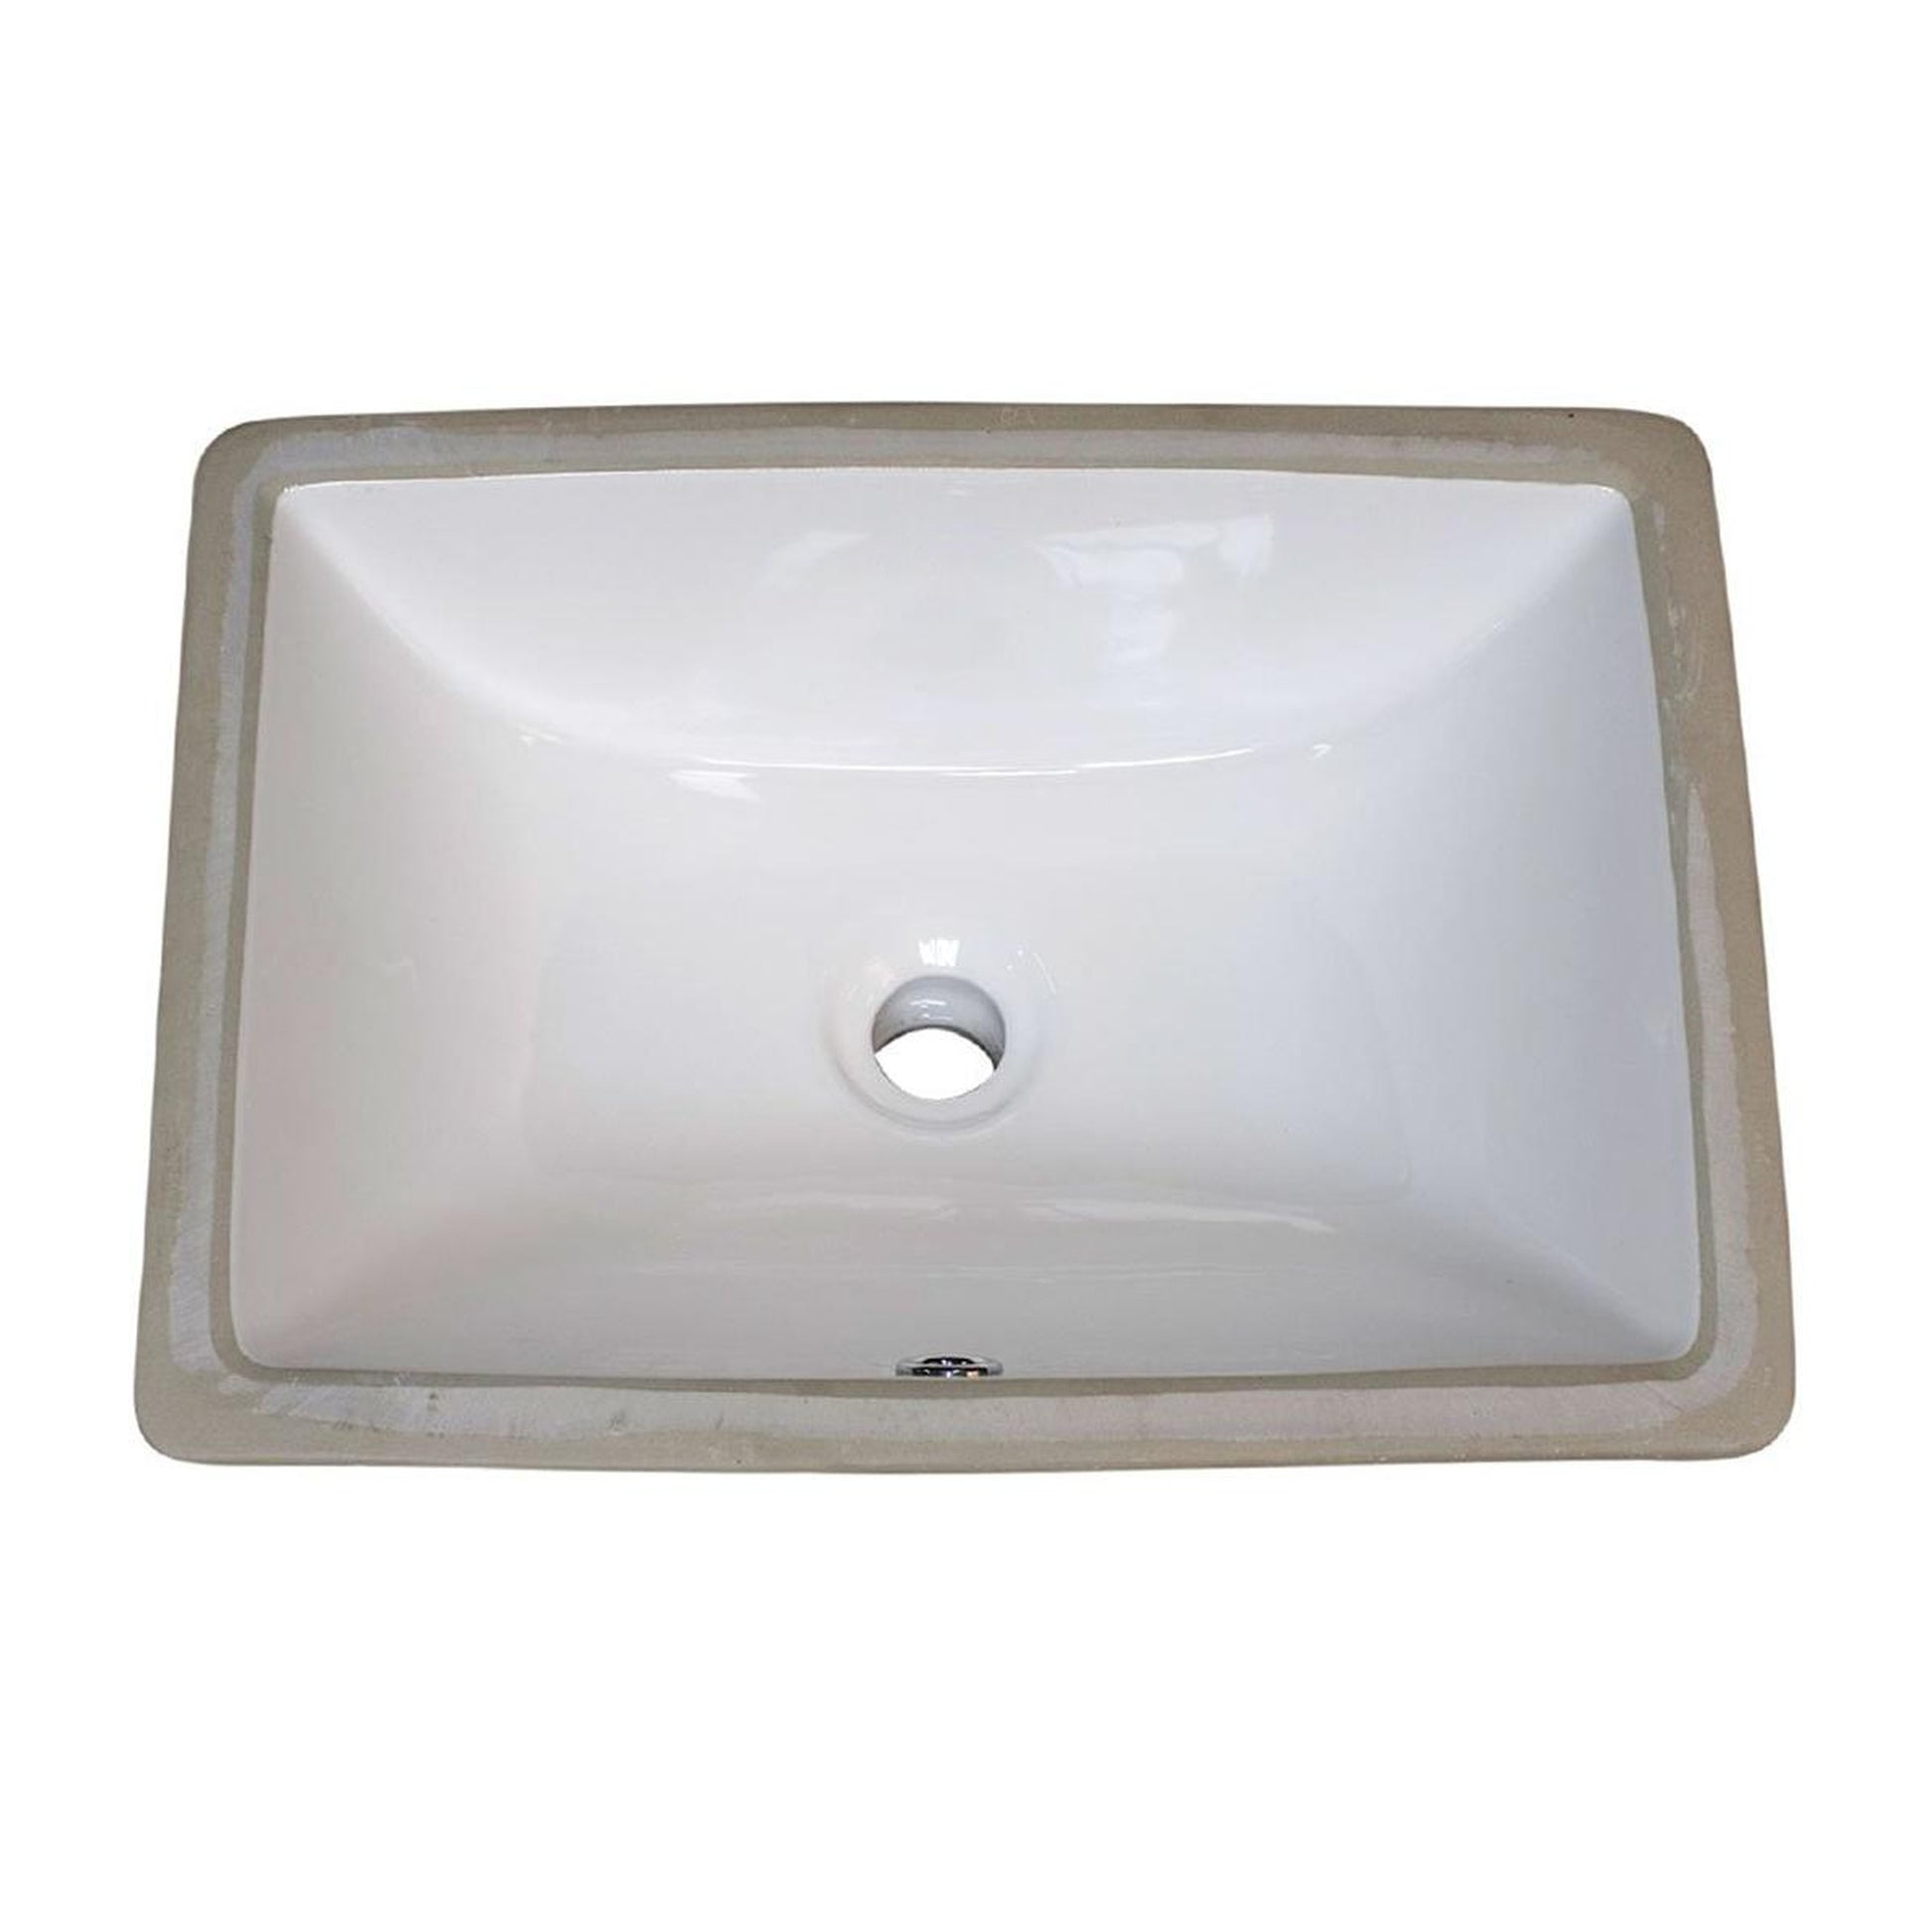 Pelican Int'l Pearl Series PL-3088 16" x 11" Individually Packaged White Porcelain Undermount Bathroom Sink